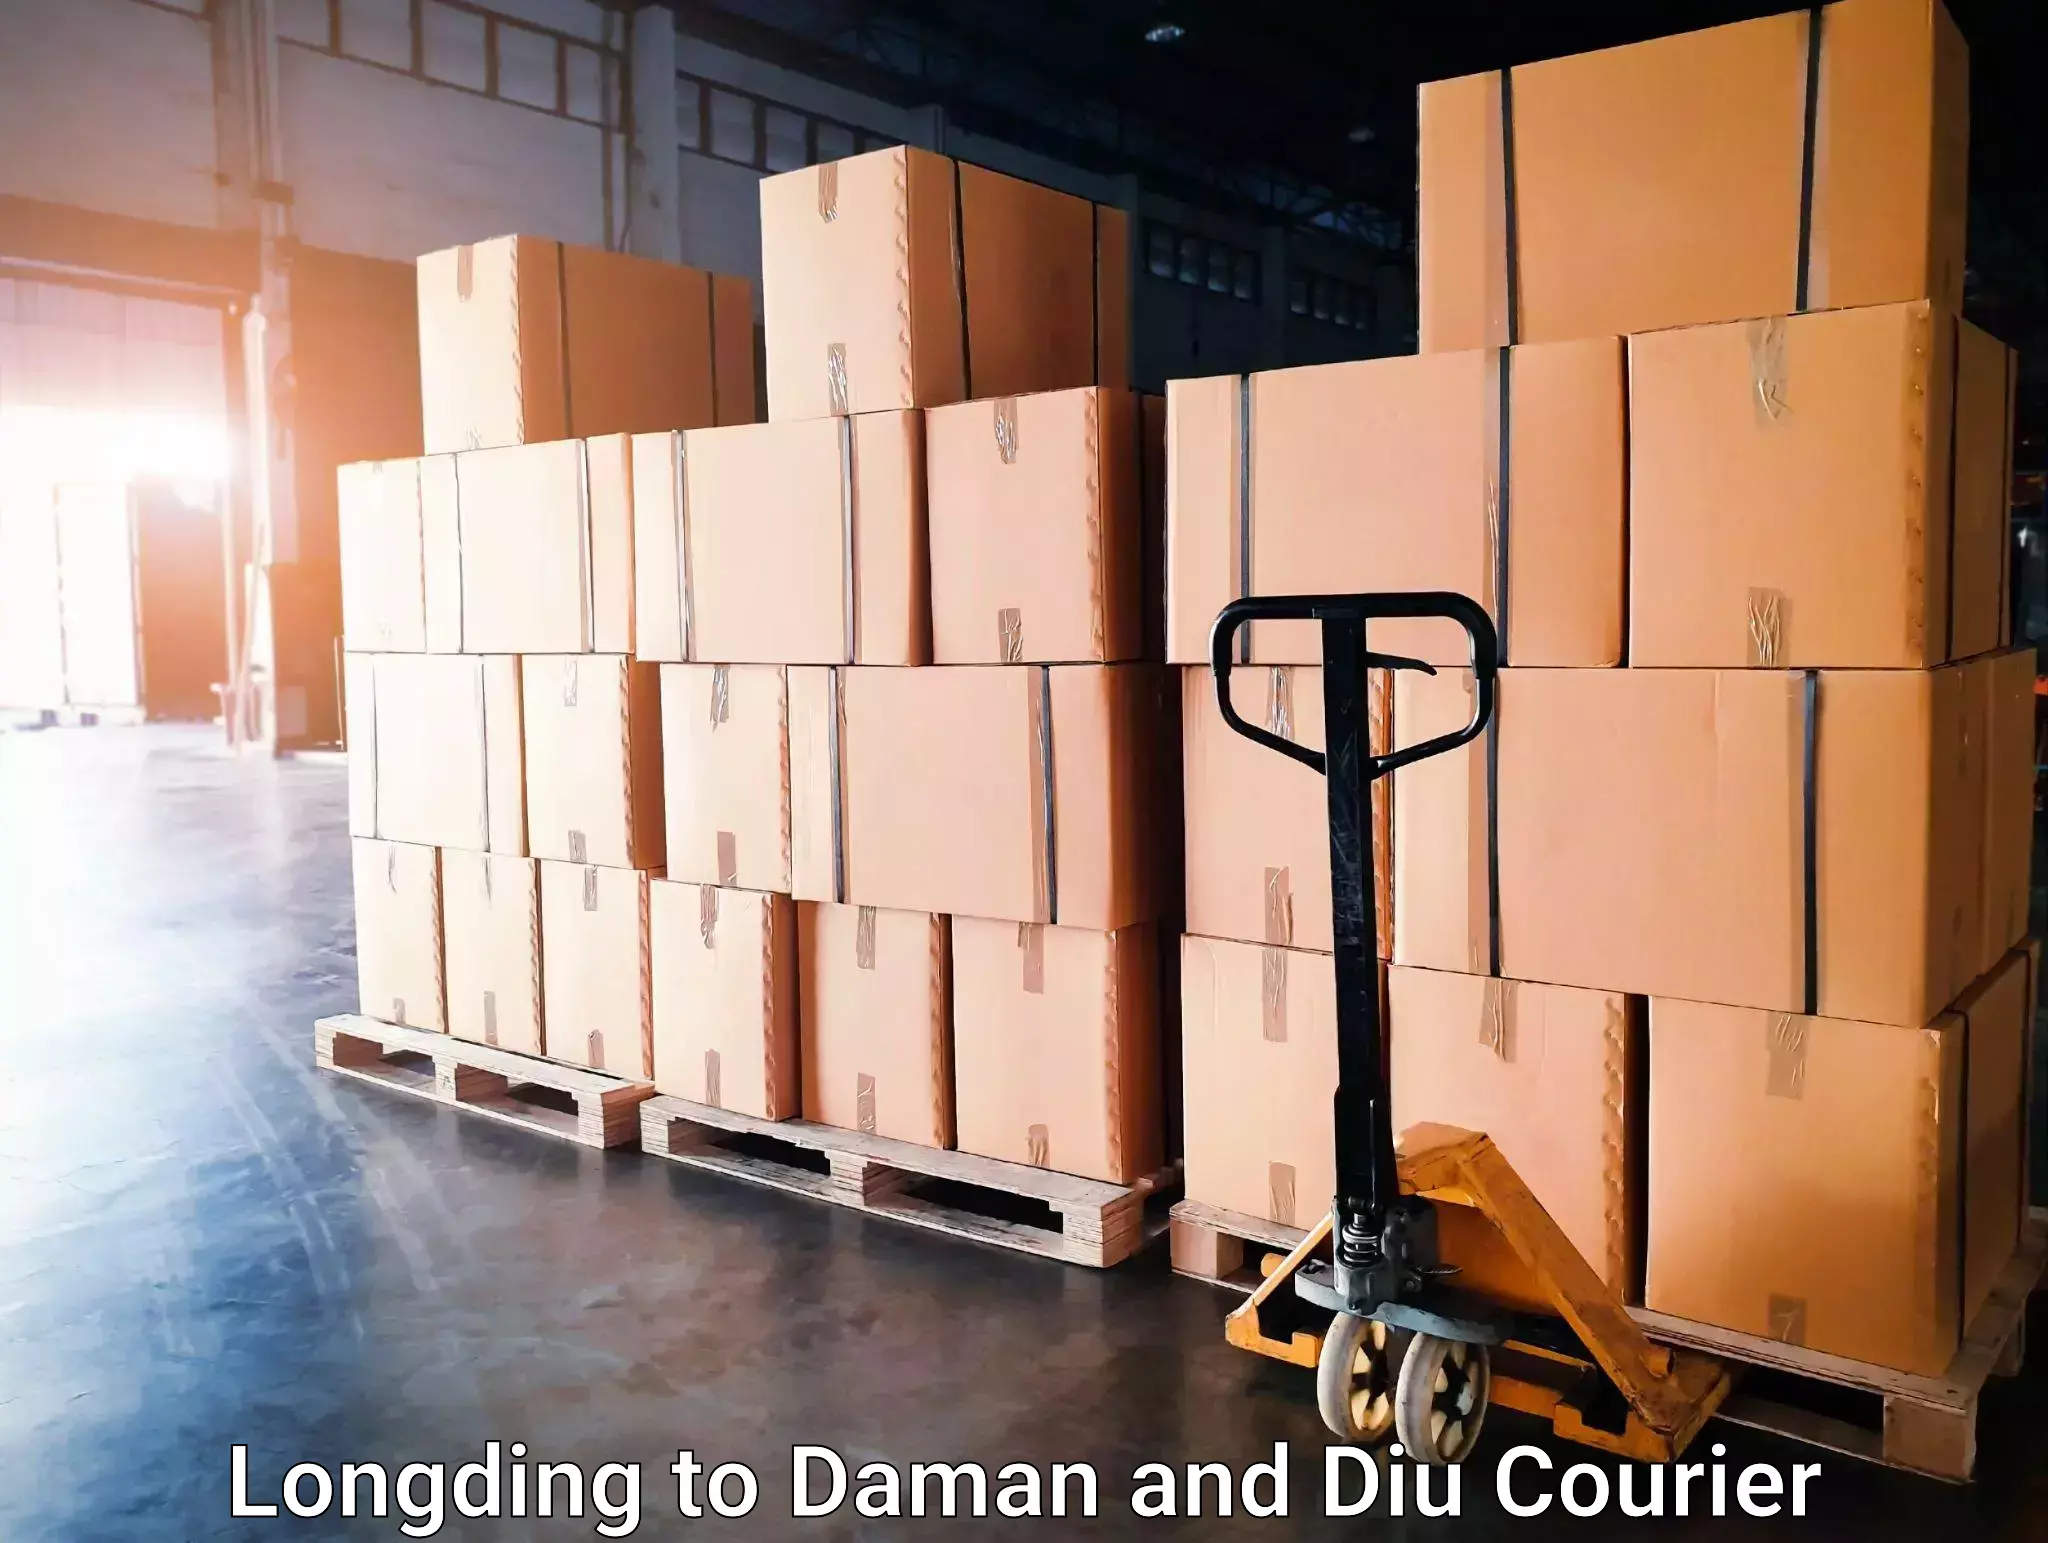 Multi-national courier services Longding to Daman and Diu